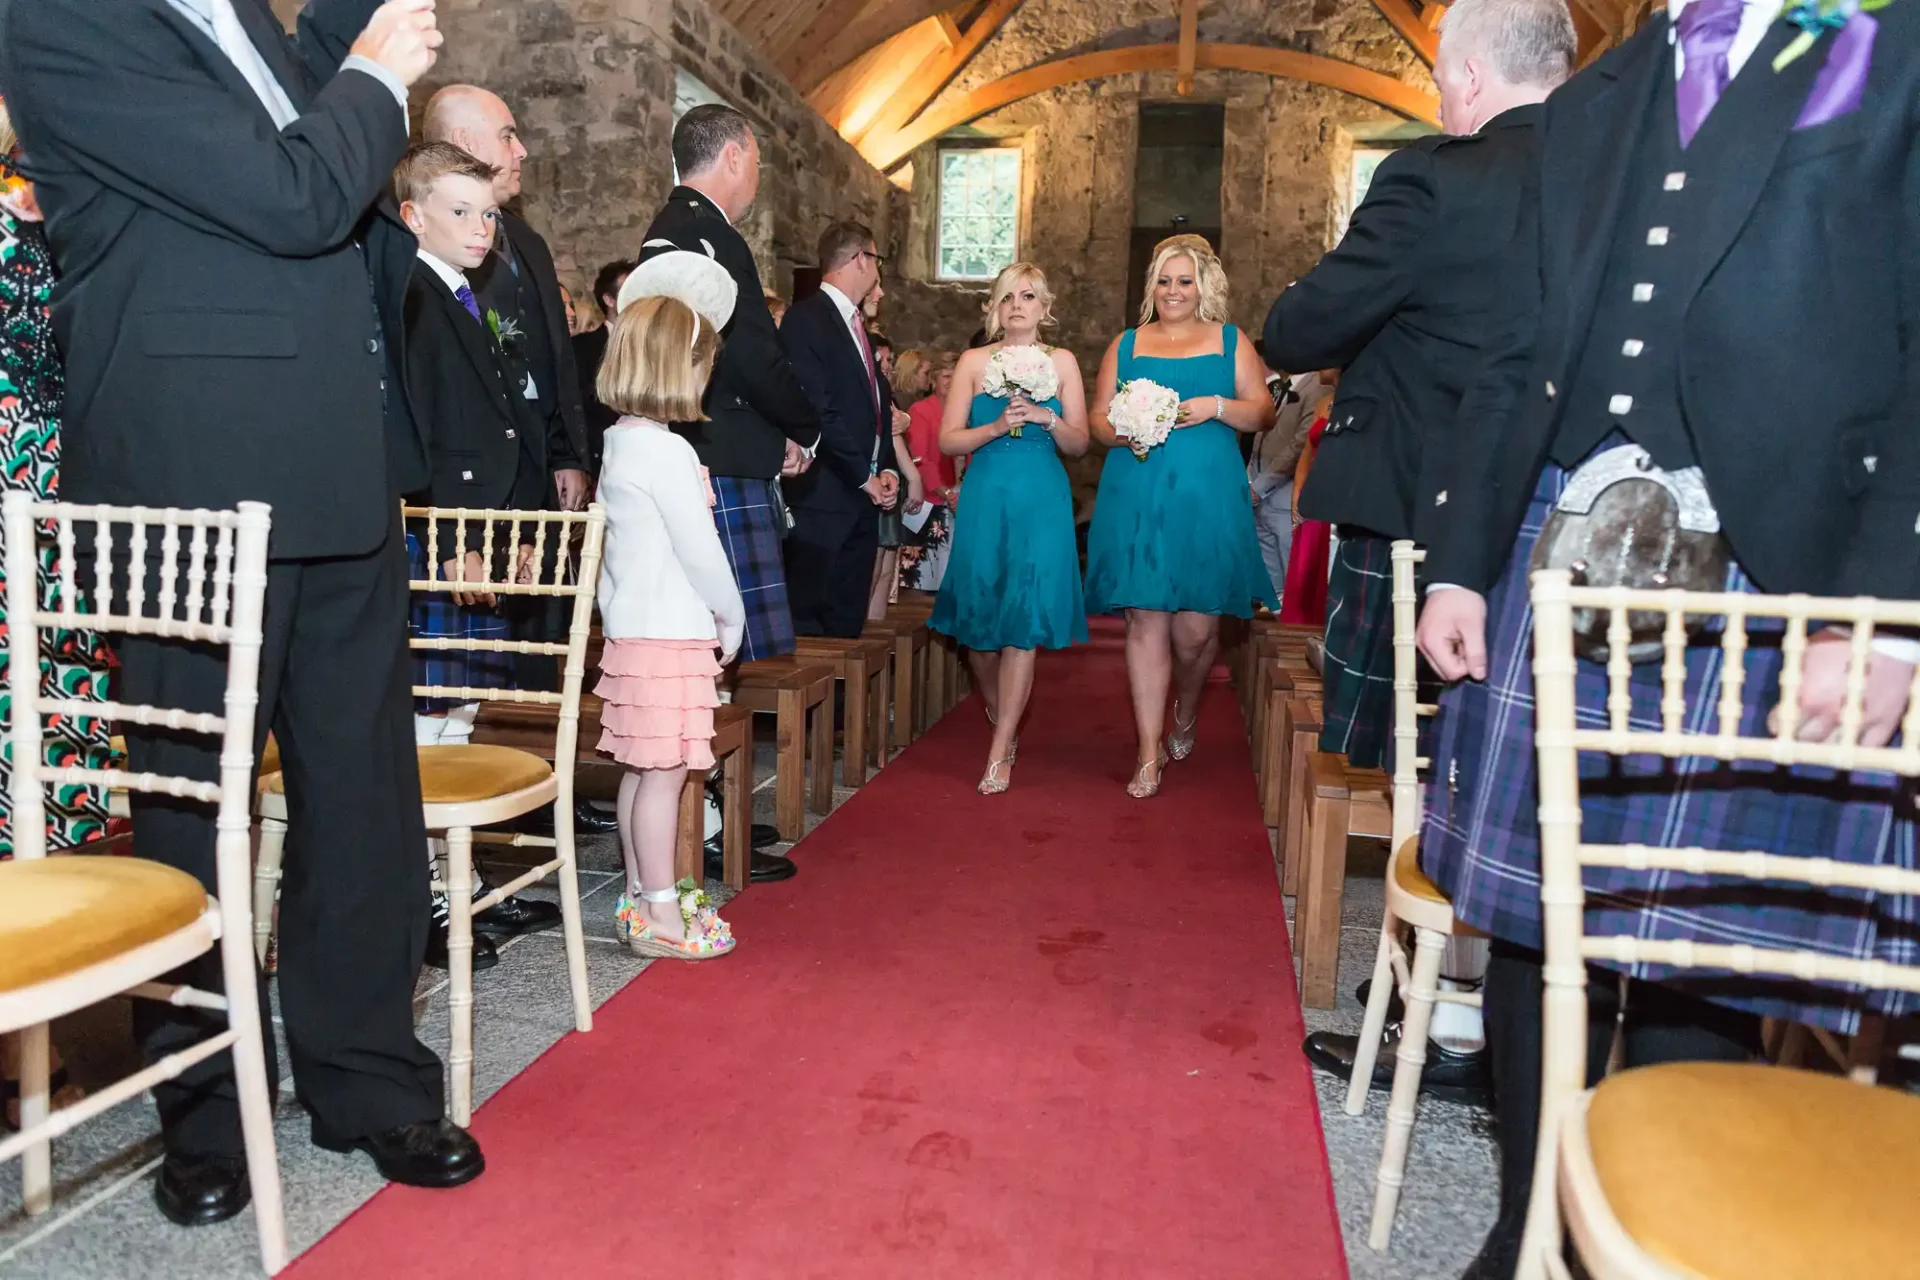 Guests in formal attire, including kilts, stand inside a stone chapel as a woman in a blue dress walks down a red carpeted aisle.